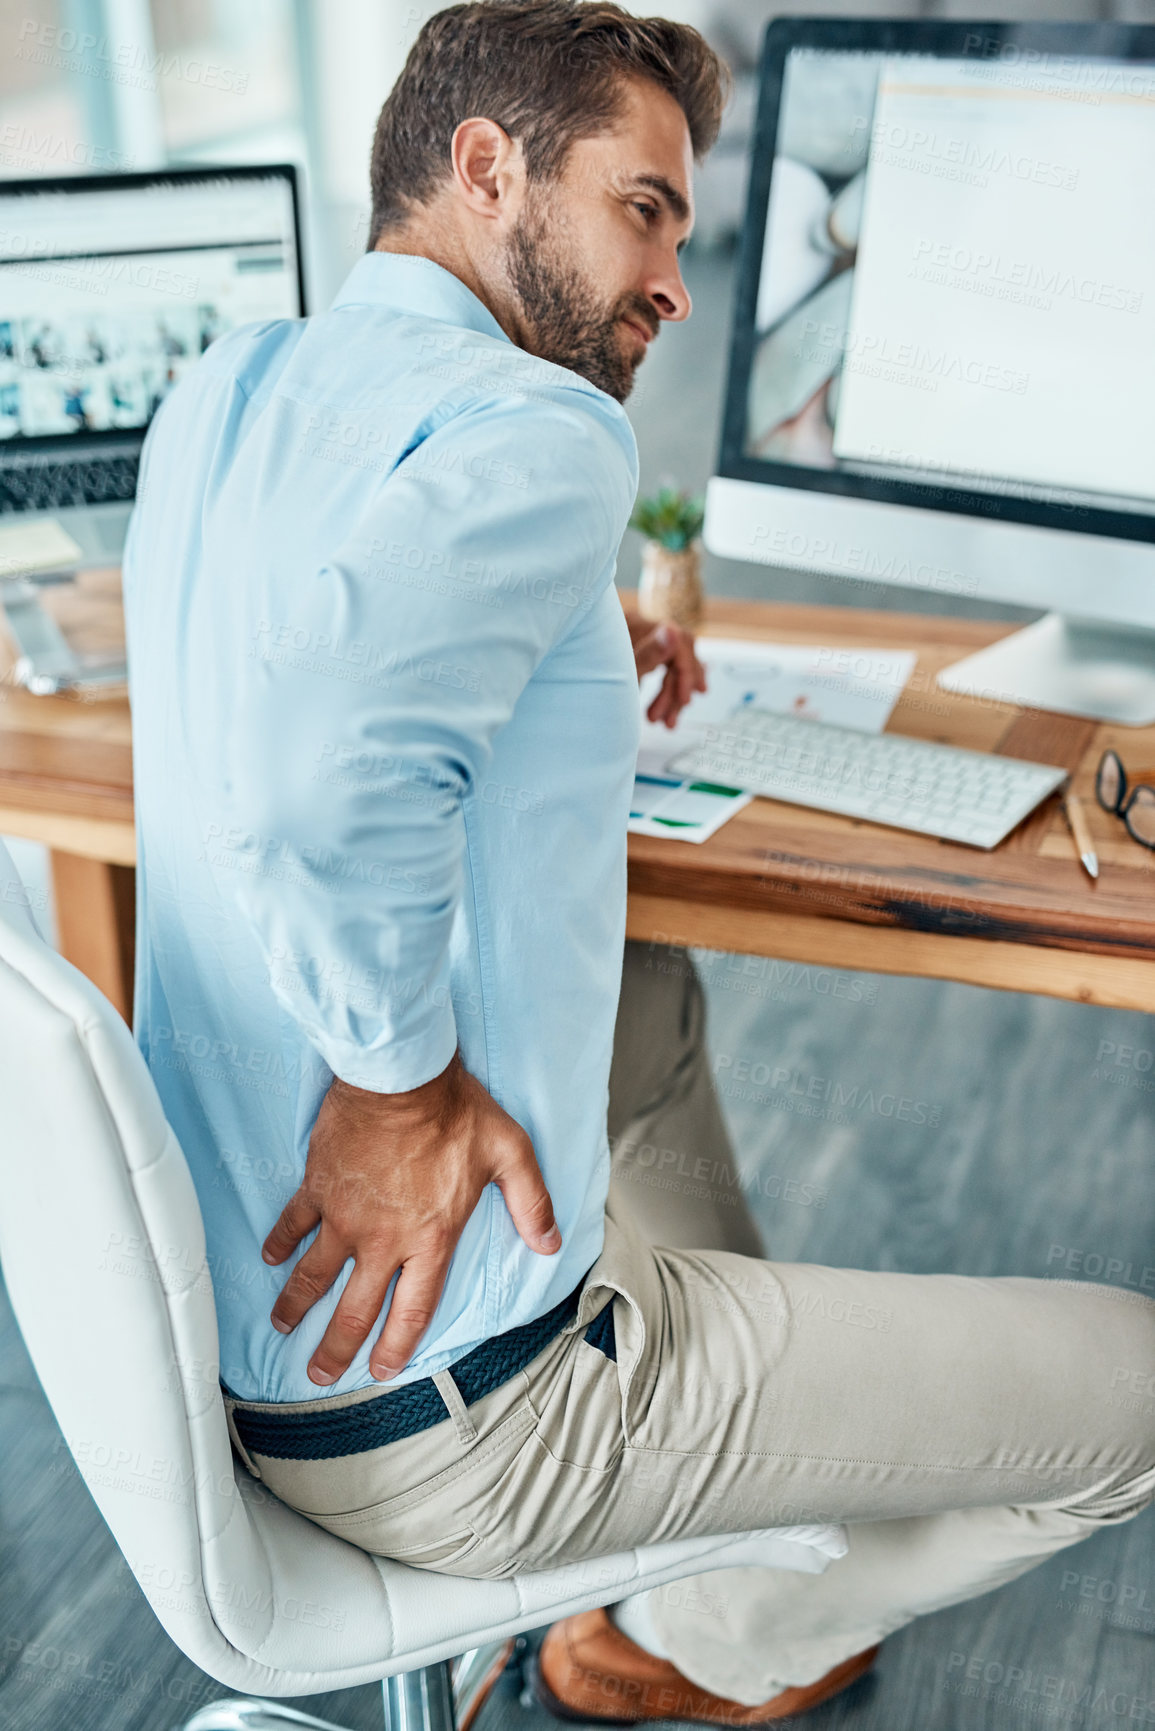 Buy stock photo Shot of a young businessman suffering with back pain while working in an office